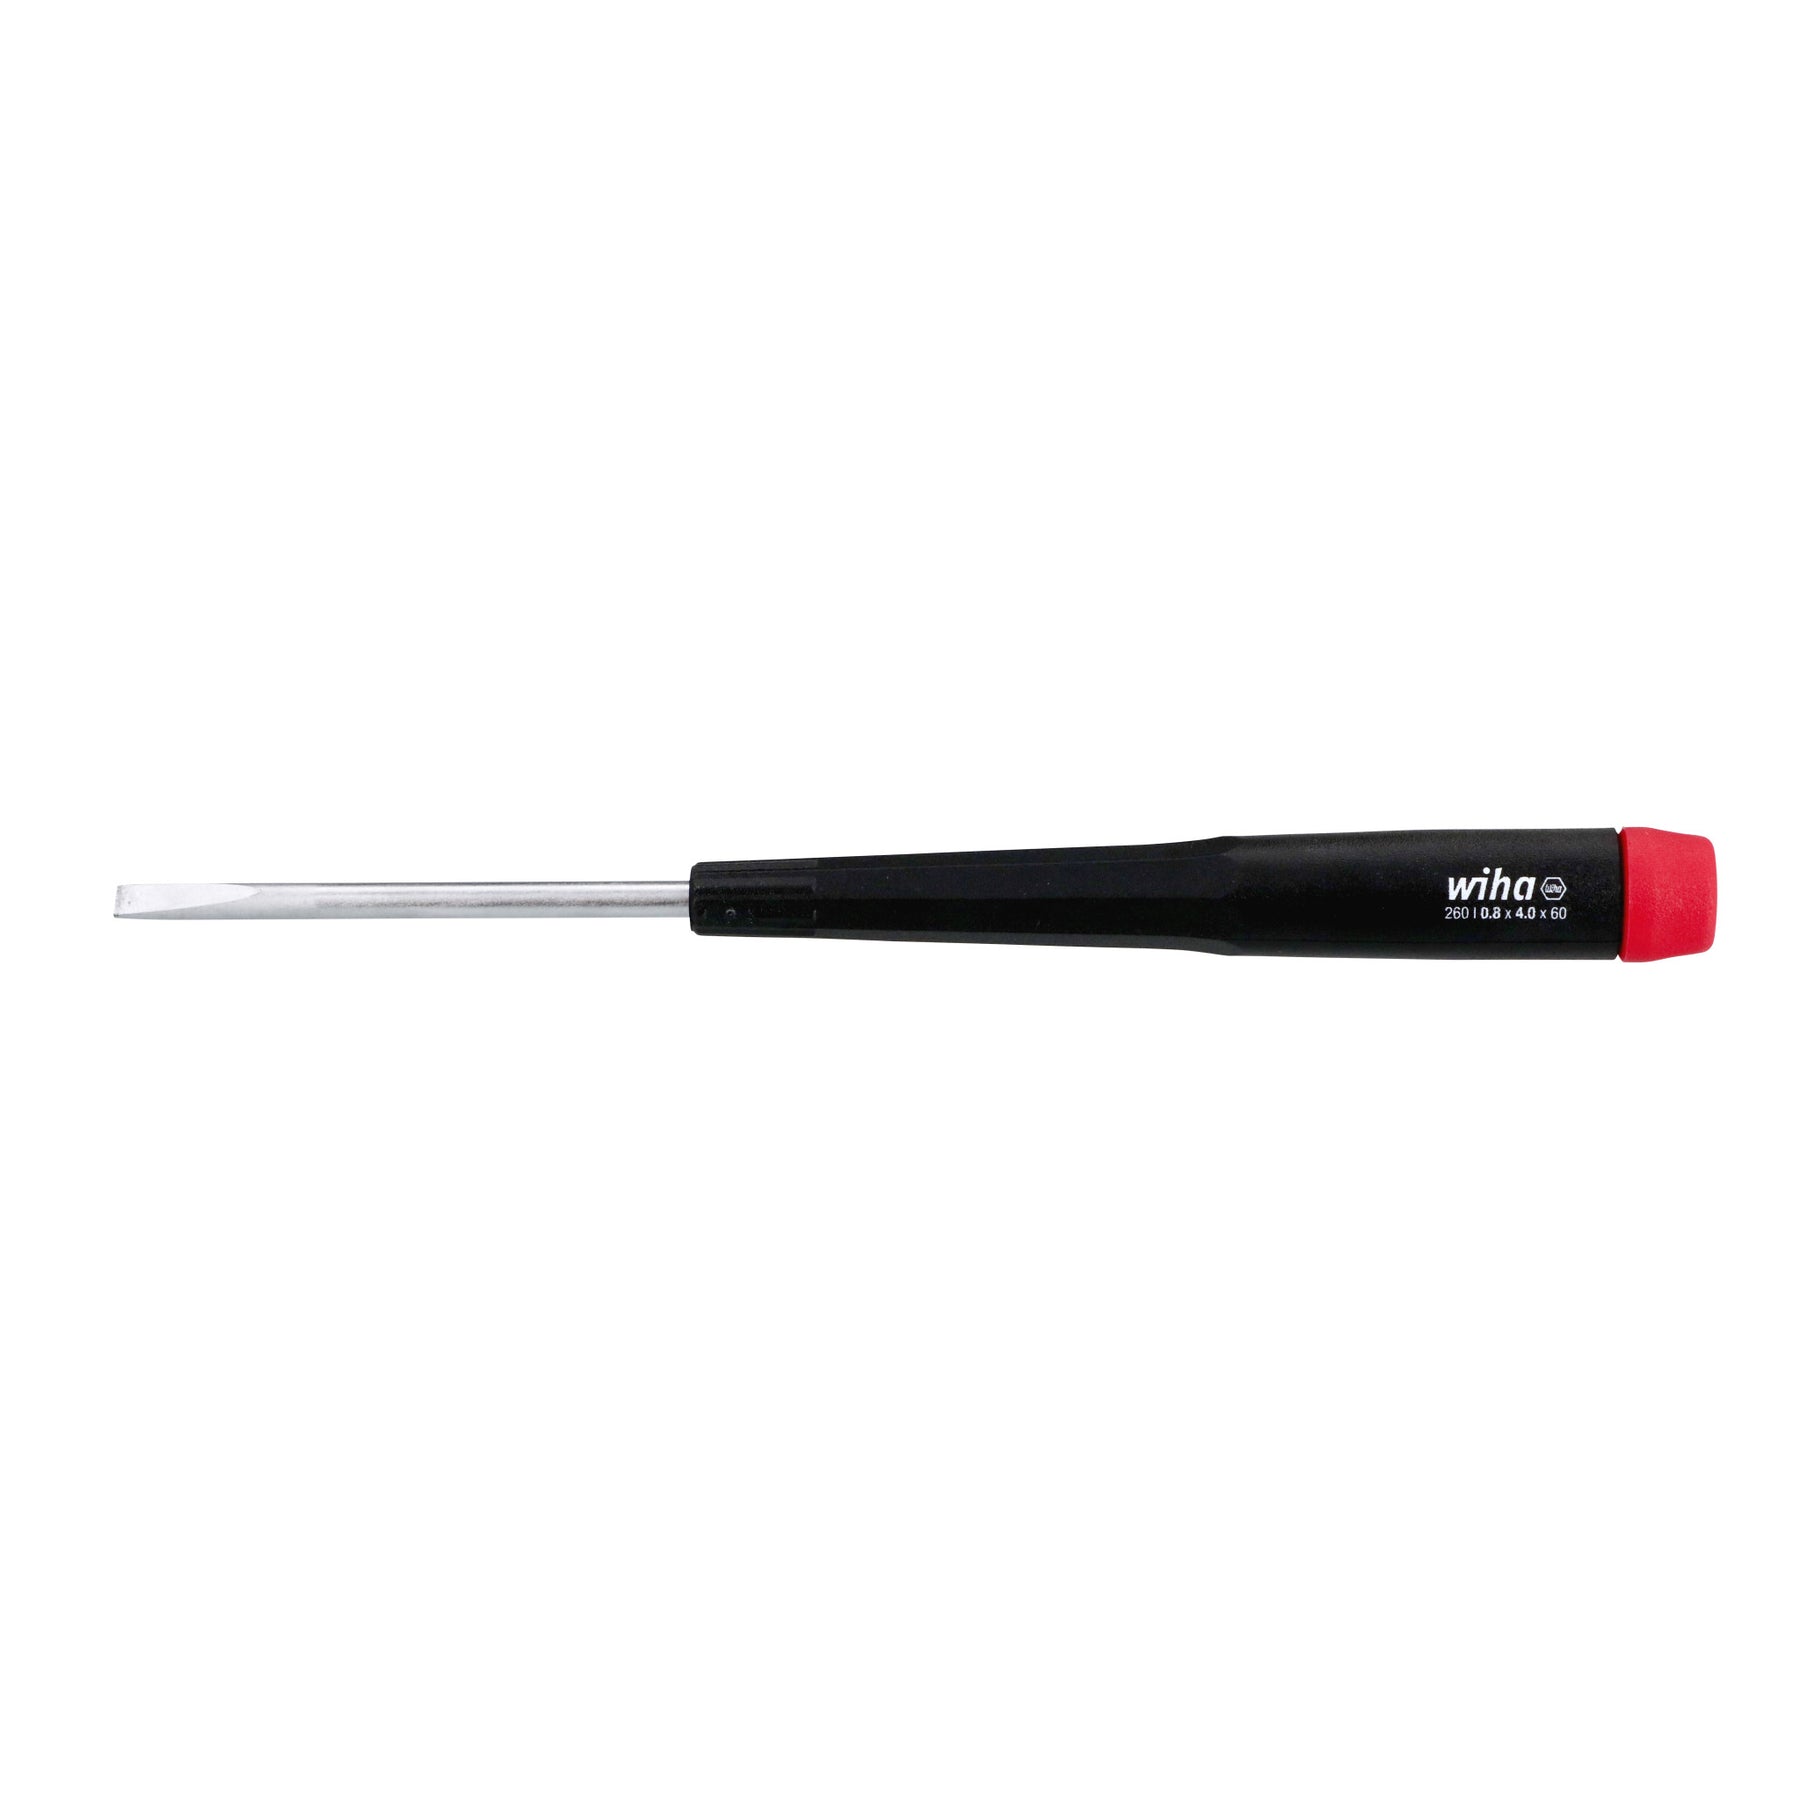 Precision Slotted Screwdriver 4.0 x 60mm